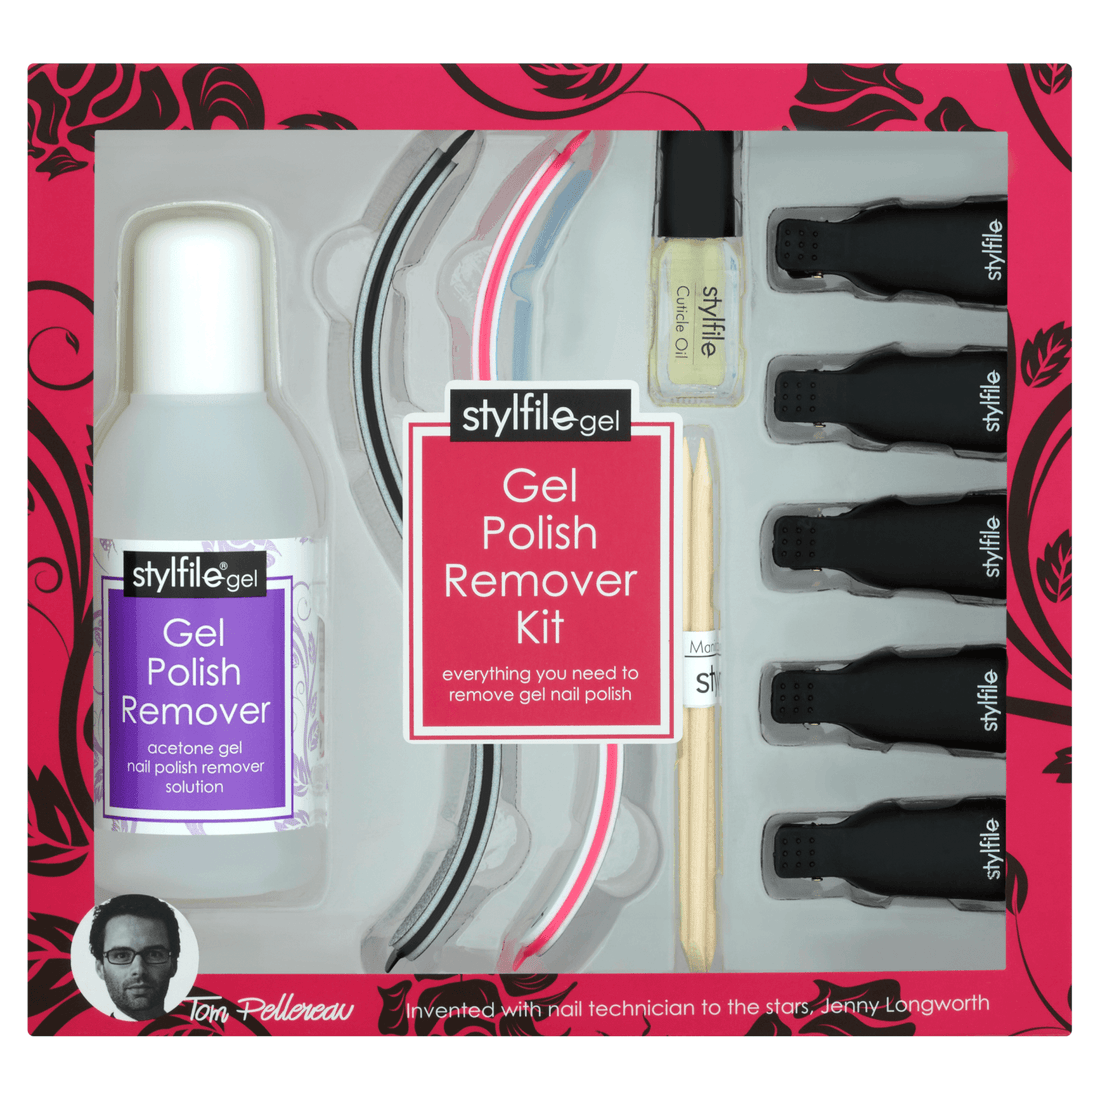 Stylfile Gel Polish Remover Kit is a sell-out on QVC